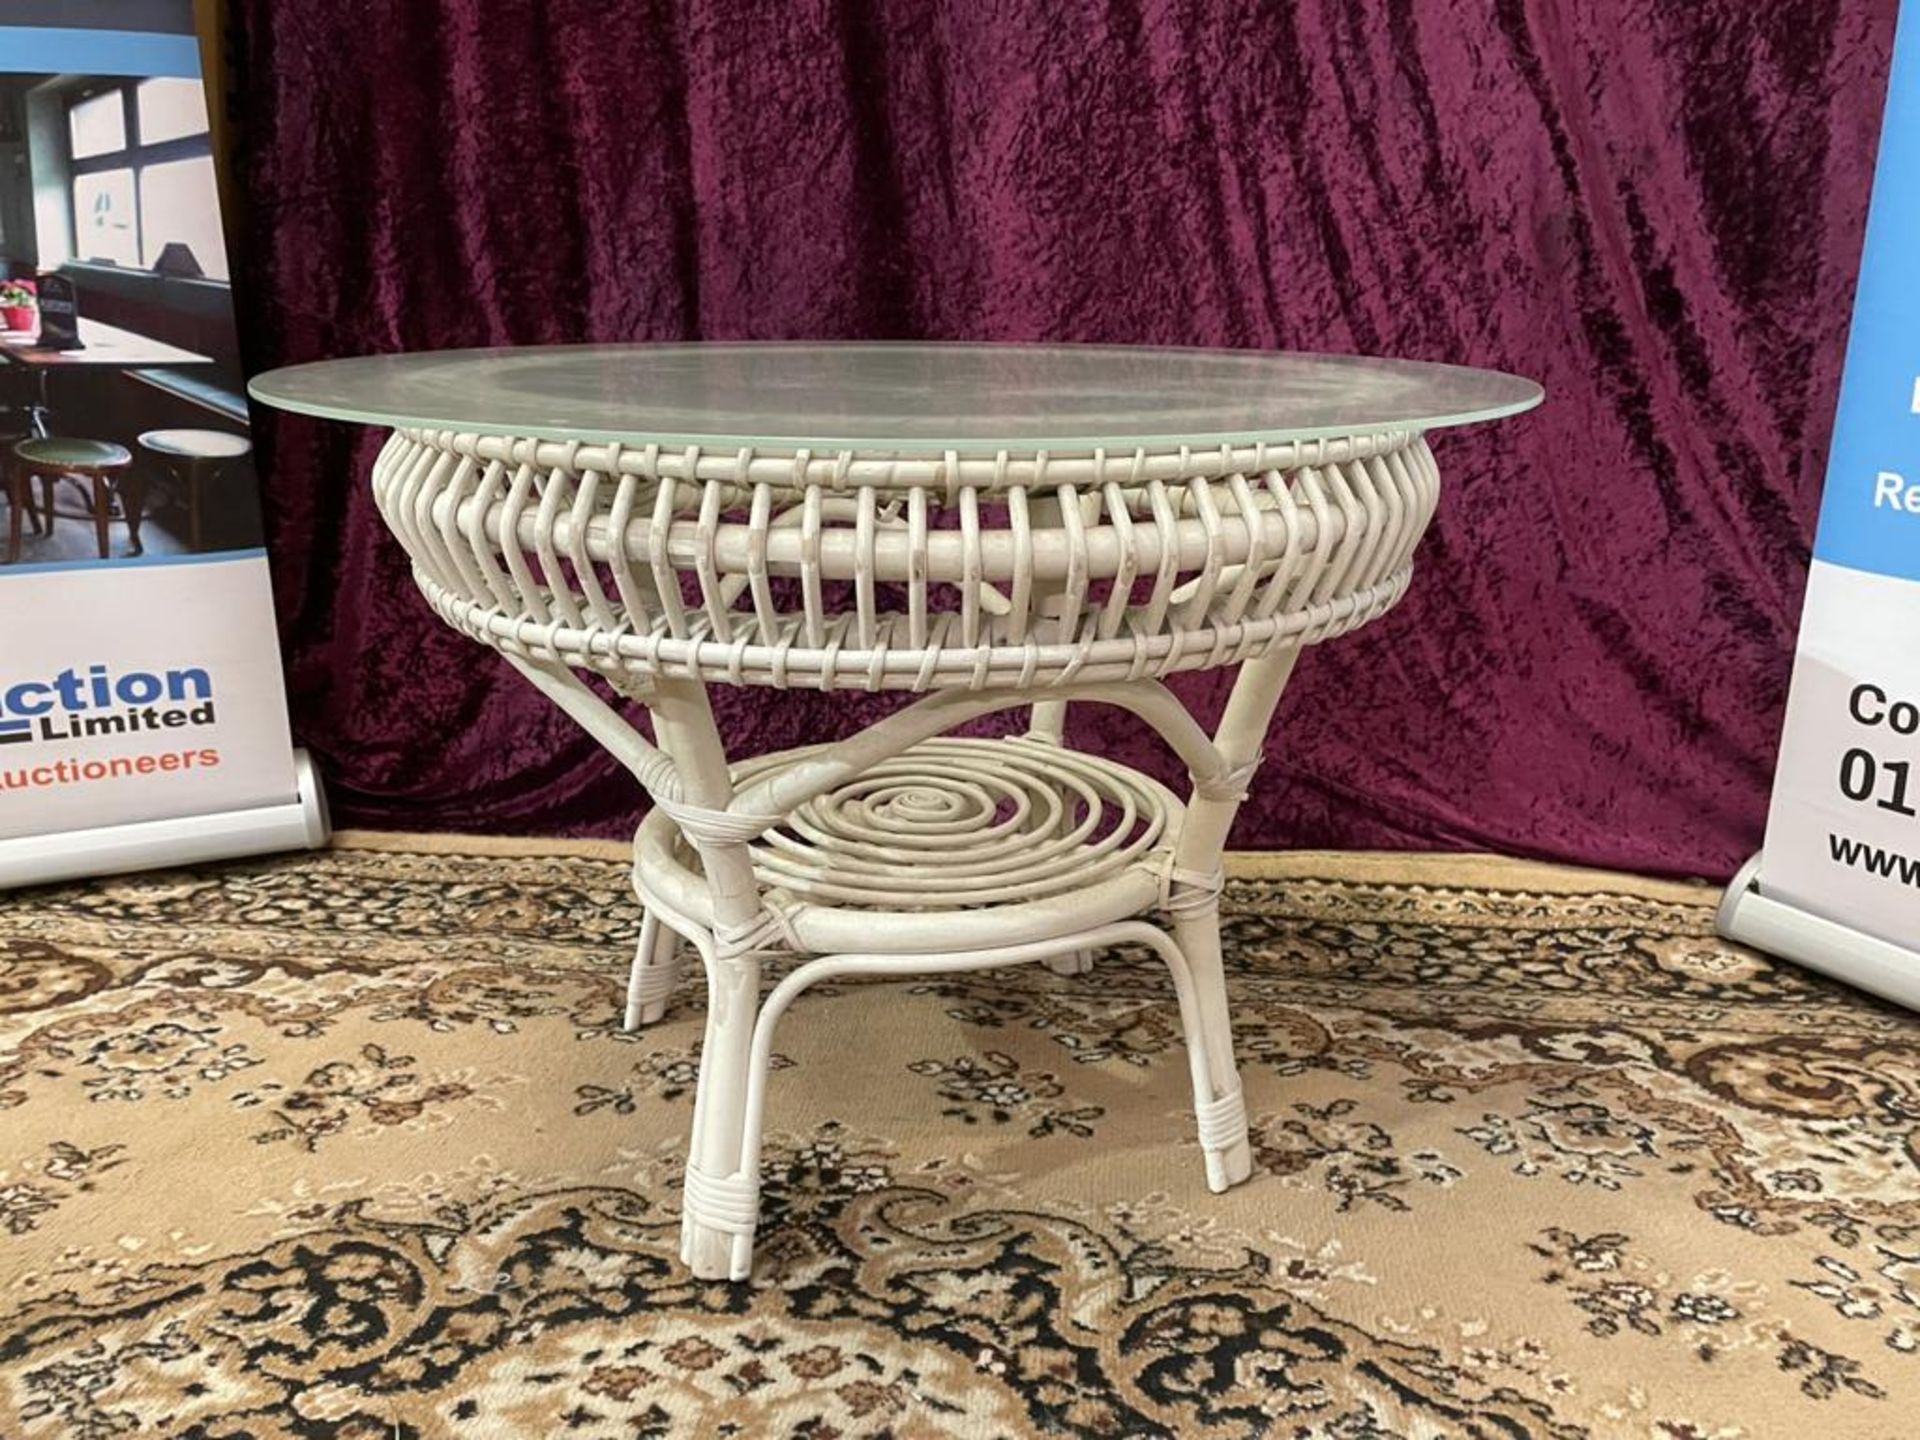 Matahari Table White with oversized 77cm Glass Frosted top 61 x 61 x 52cm